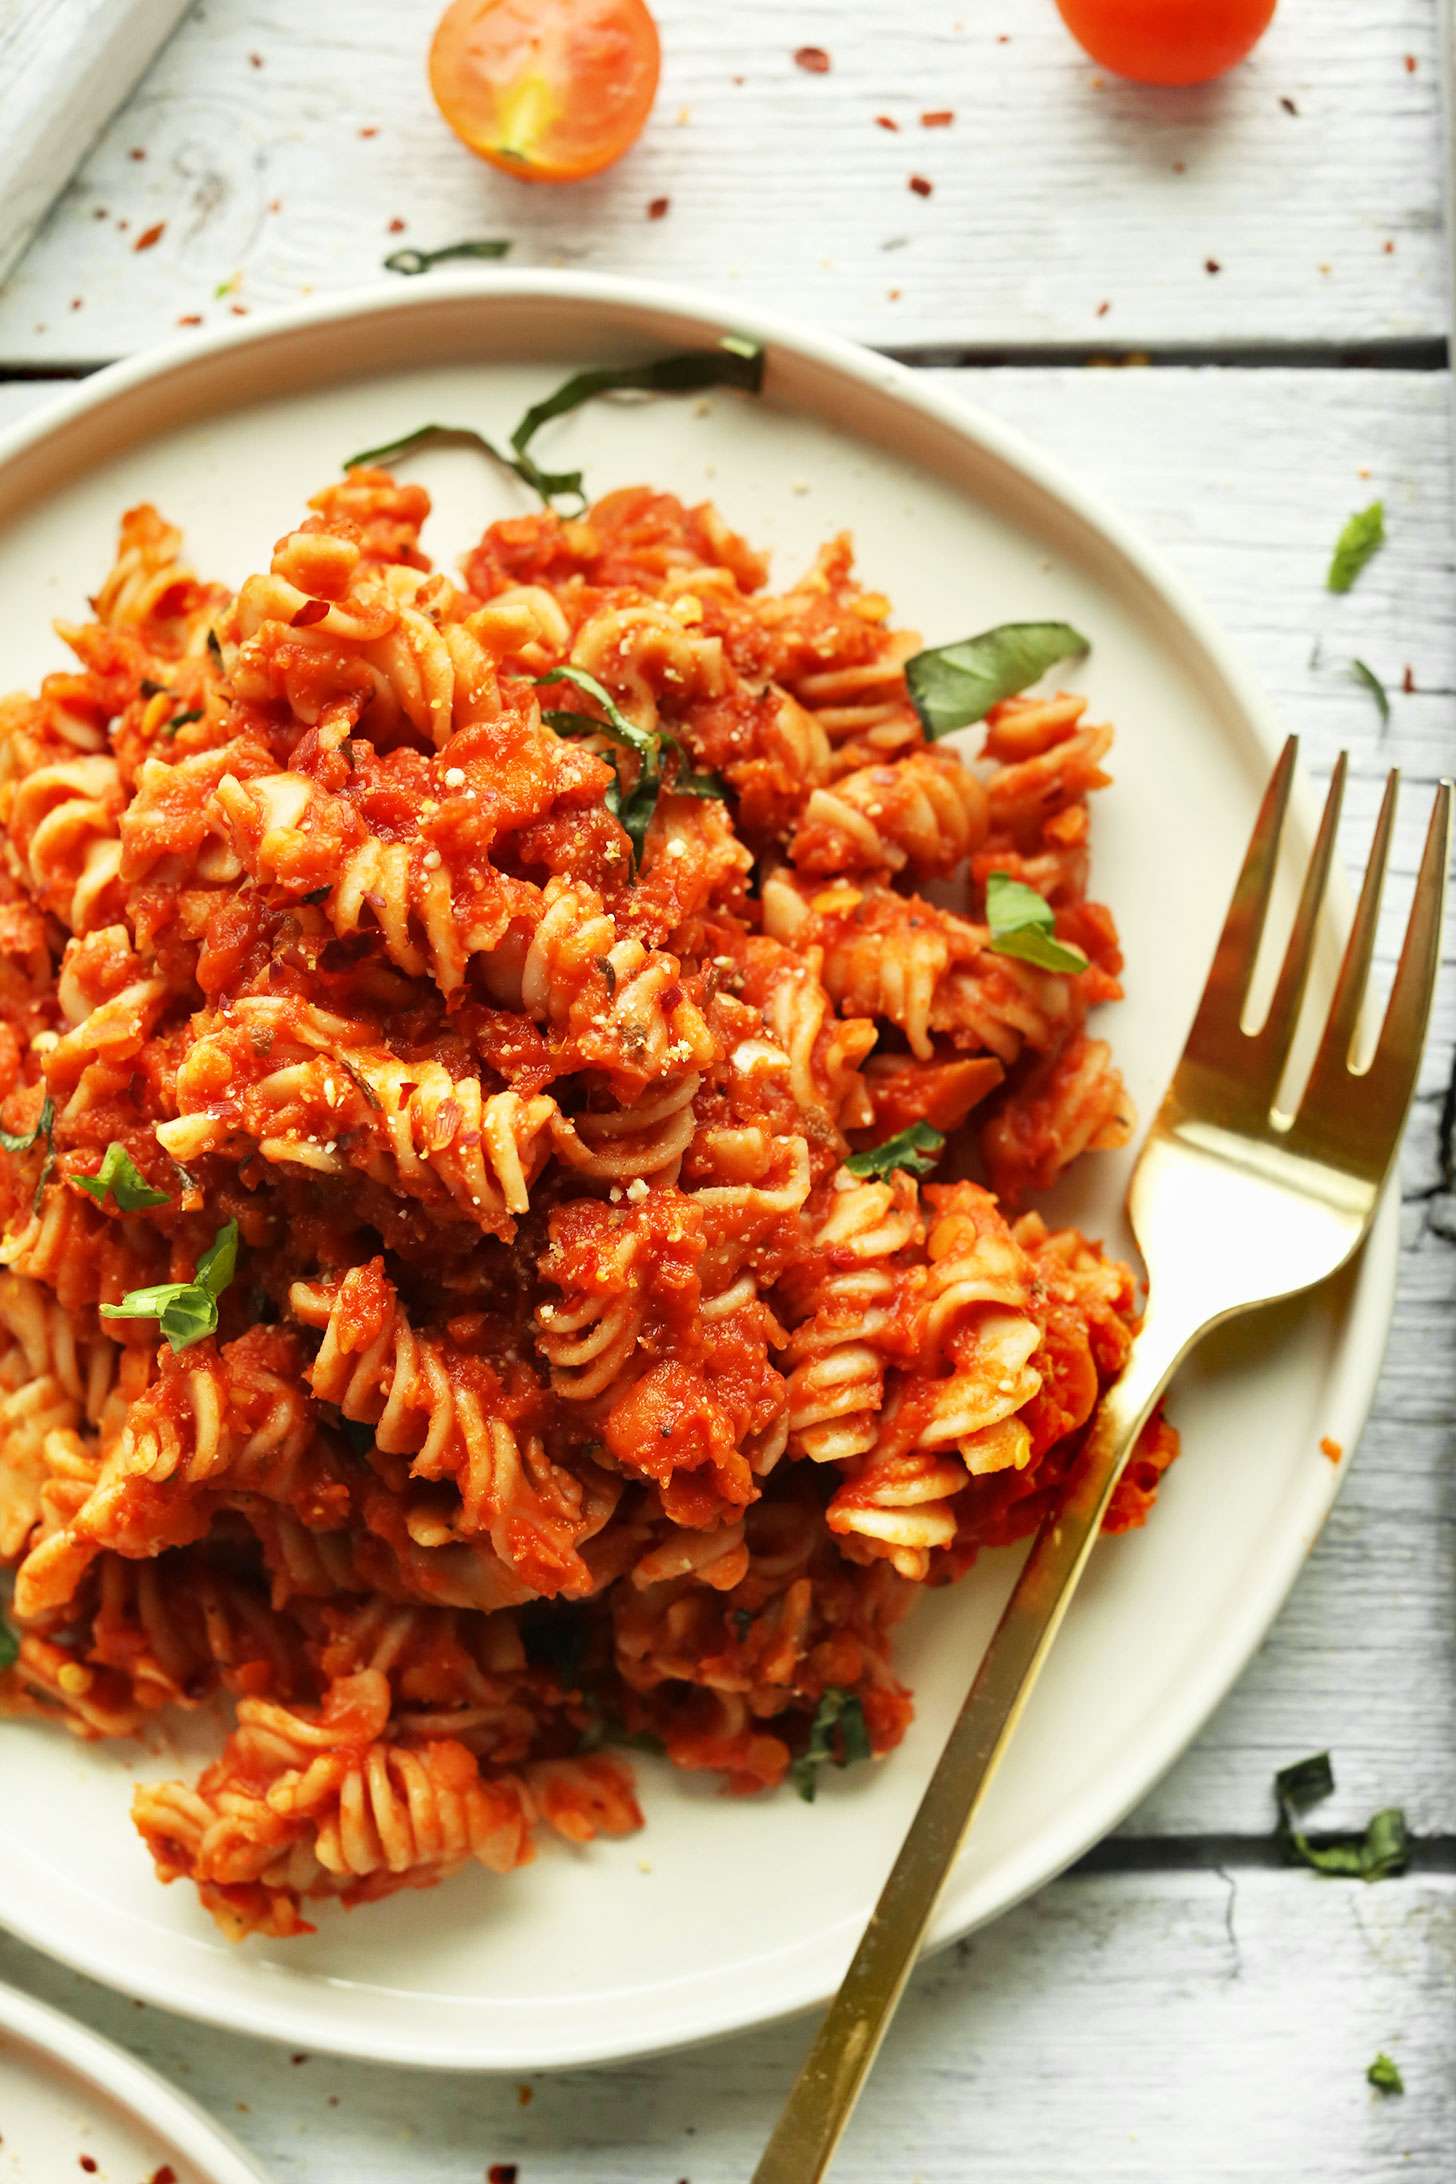 Spicy Red Pasta with Lentils